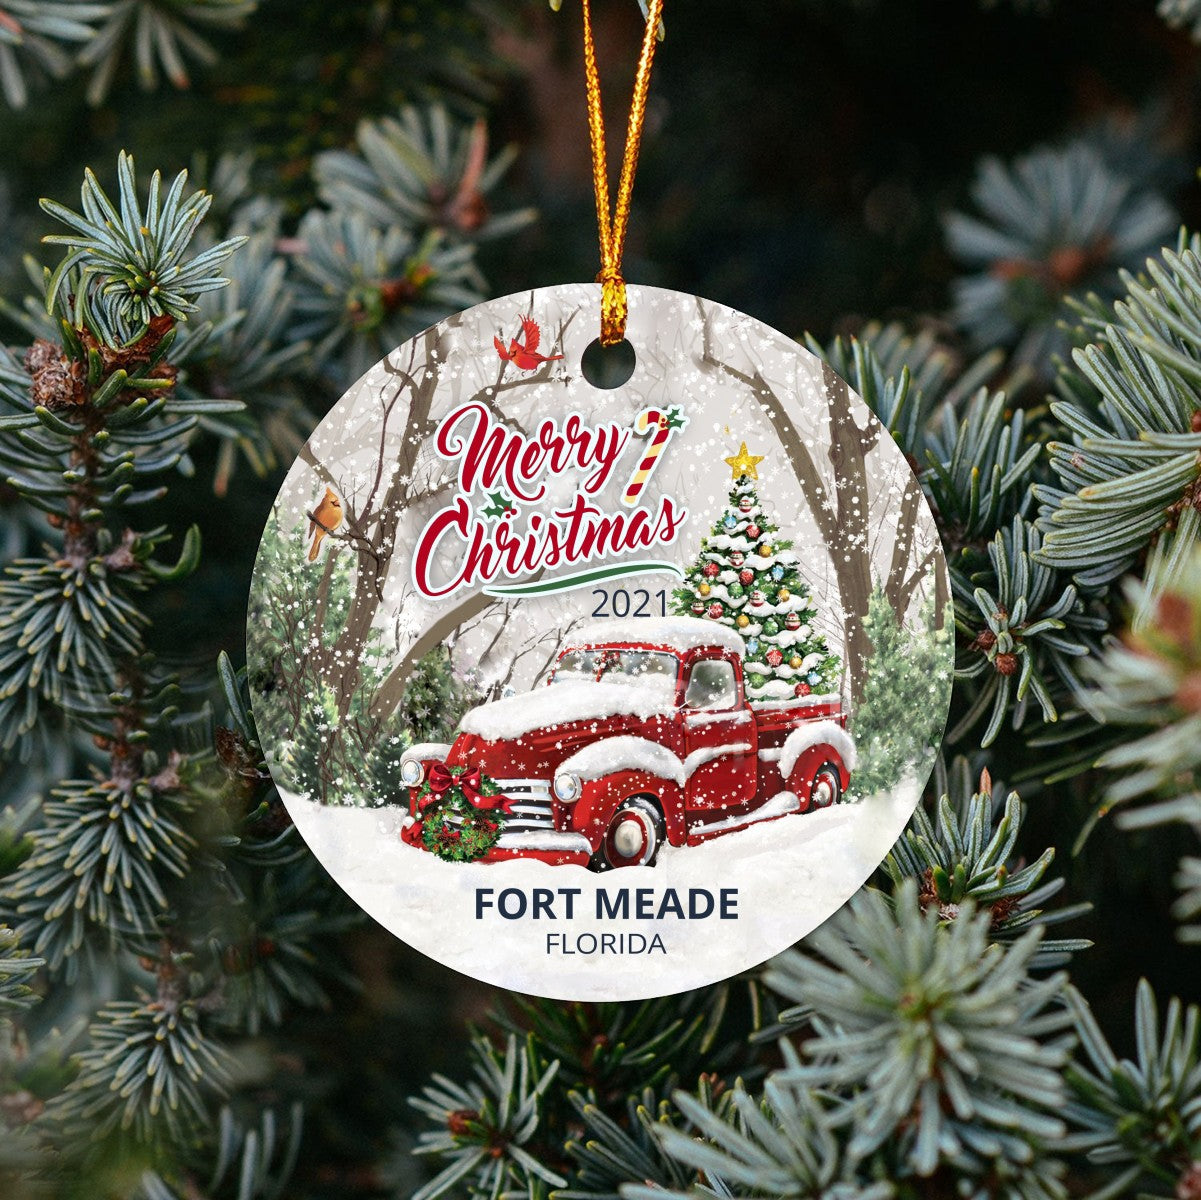 Christmas Tree Ornaments Fort Meade - Ornament With Name City, State Fort Meade Florida FL Ornament - Red Truck Xmas Ornaments 3'' Plastic Gift For Family, Friend And Housewarming